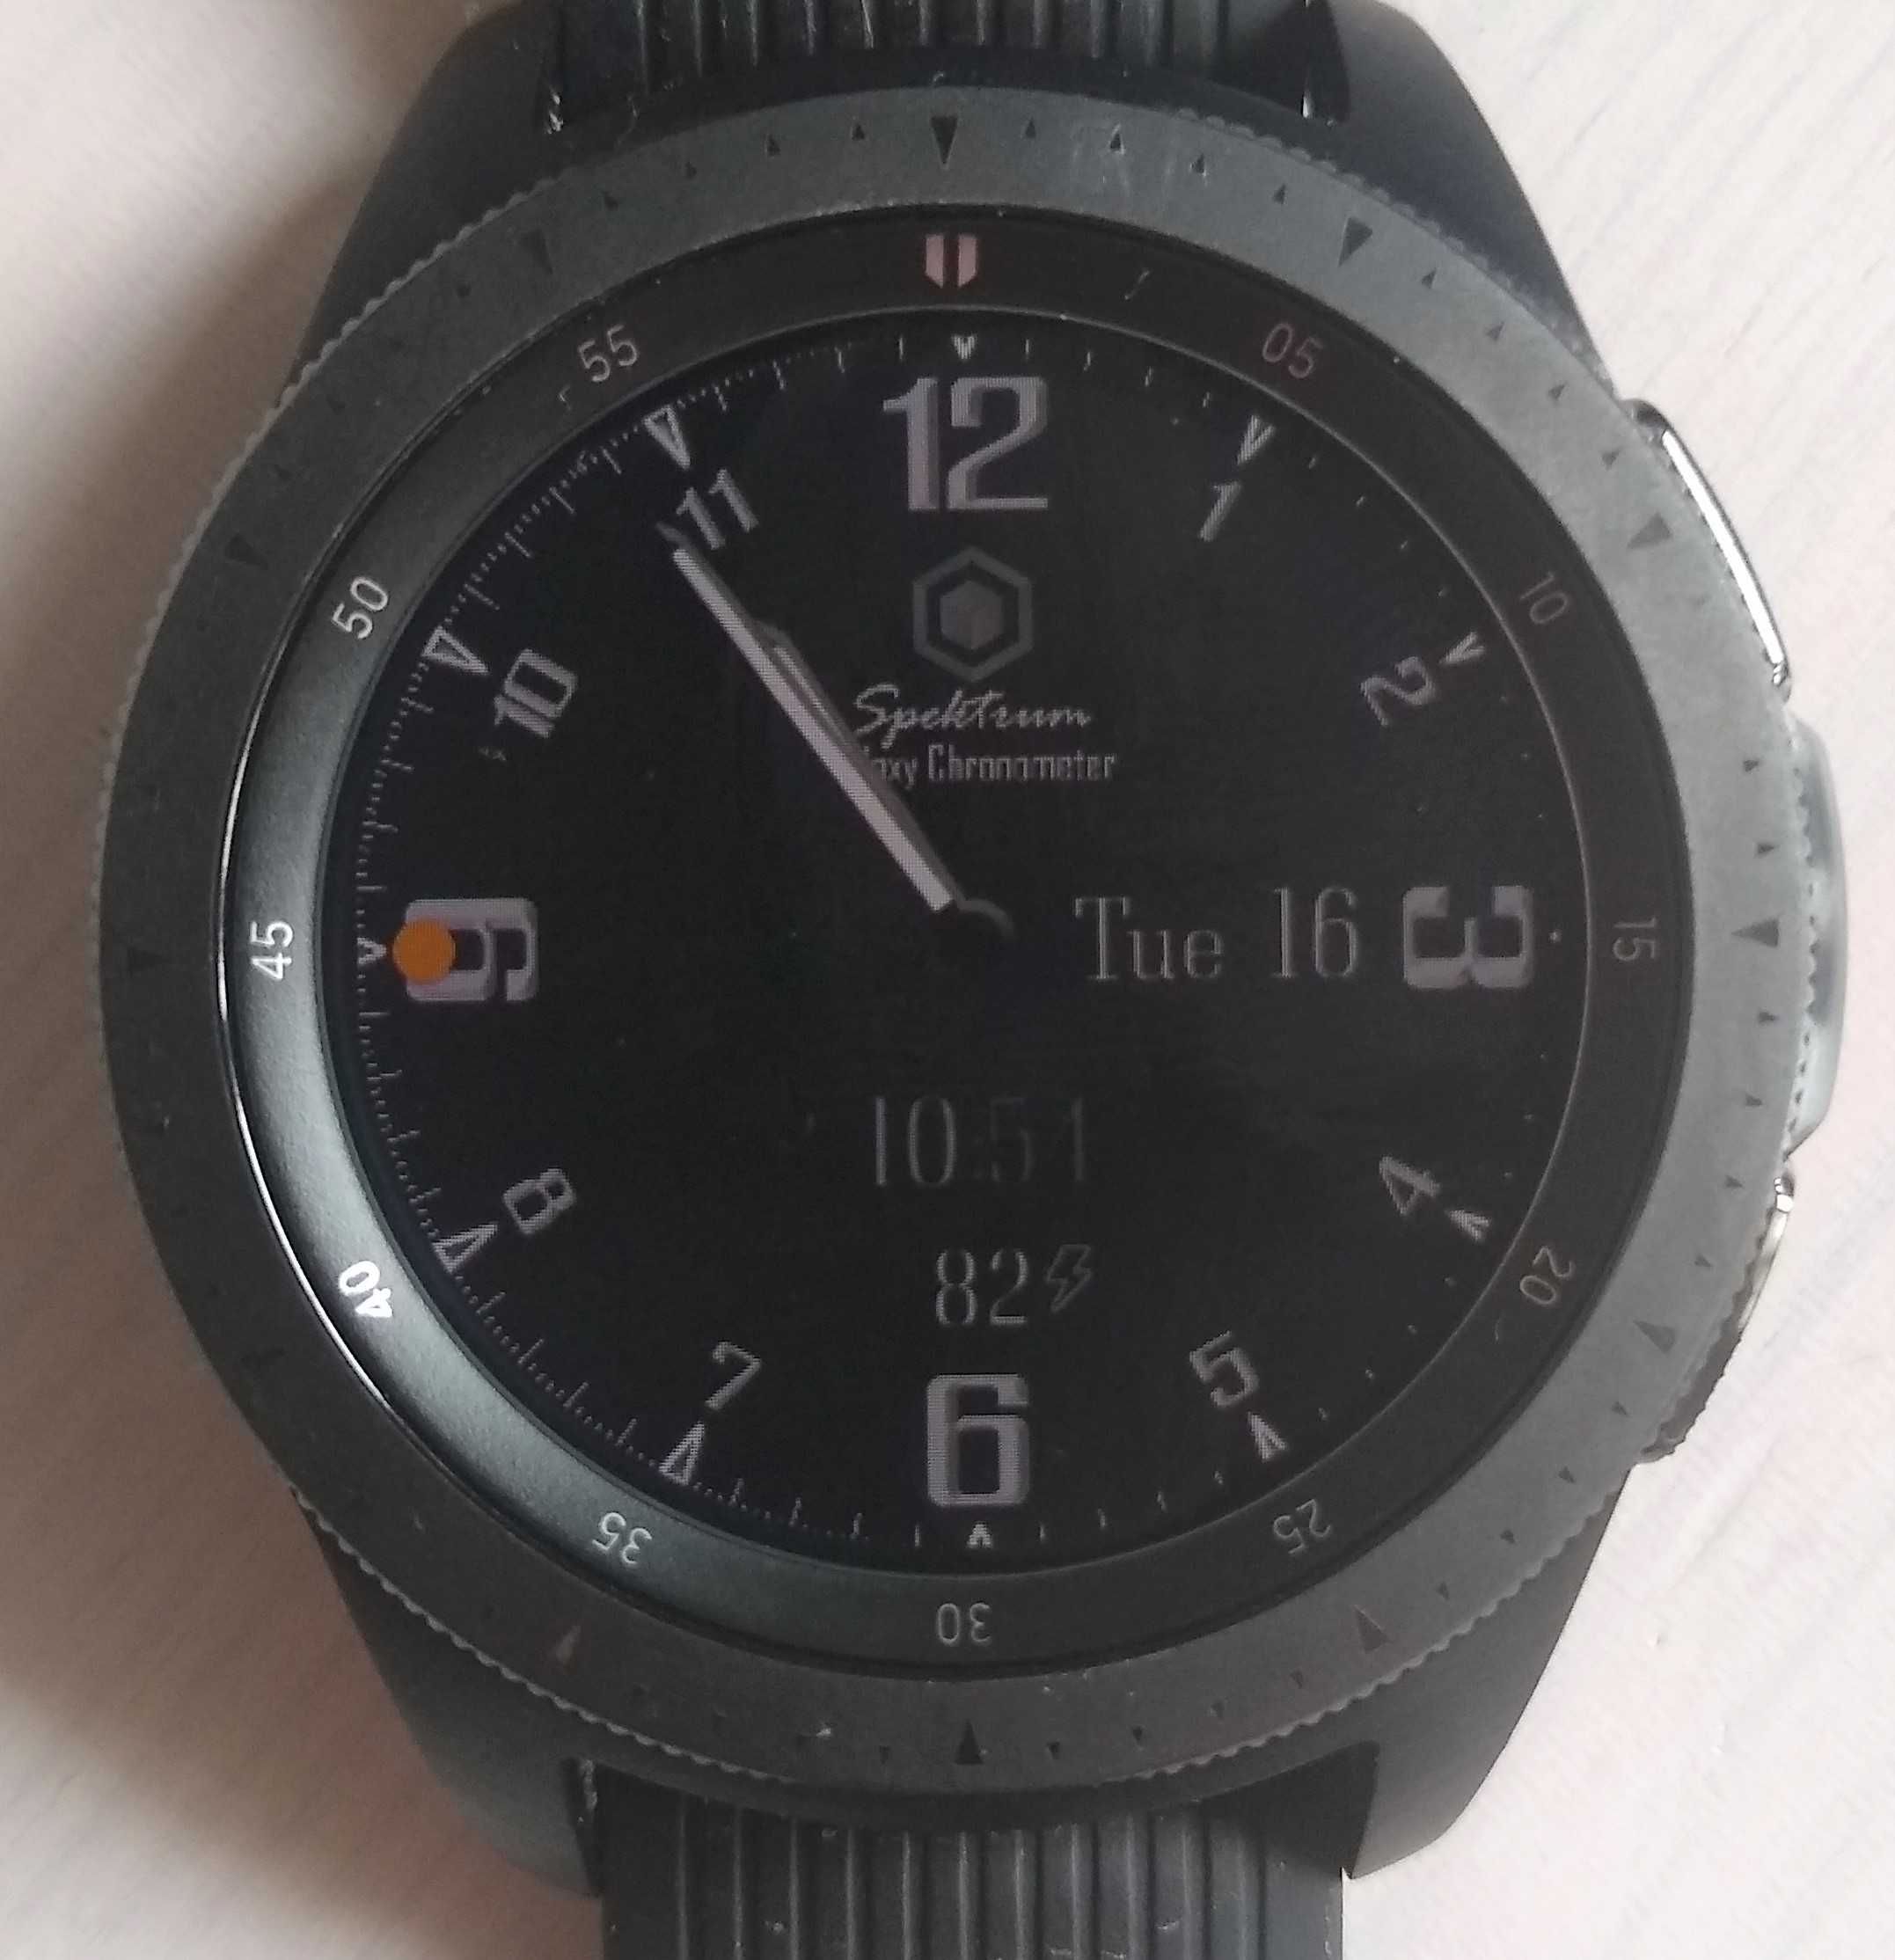 Misalignment issues with watch face of galaxy watch - Samsung Community